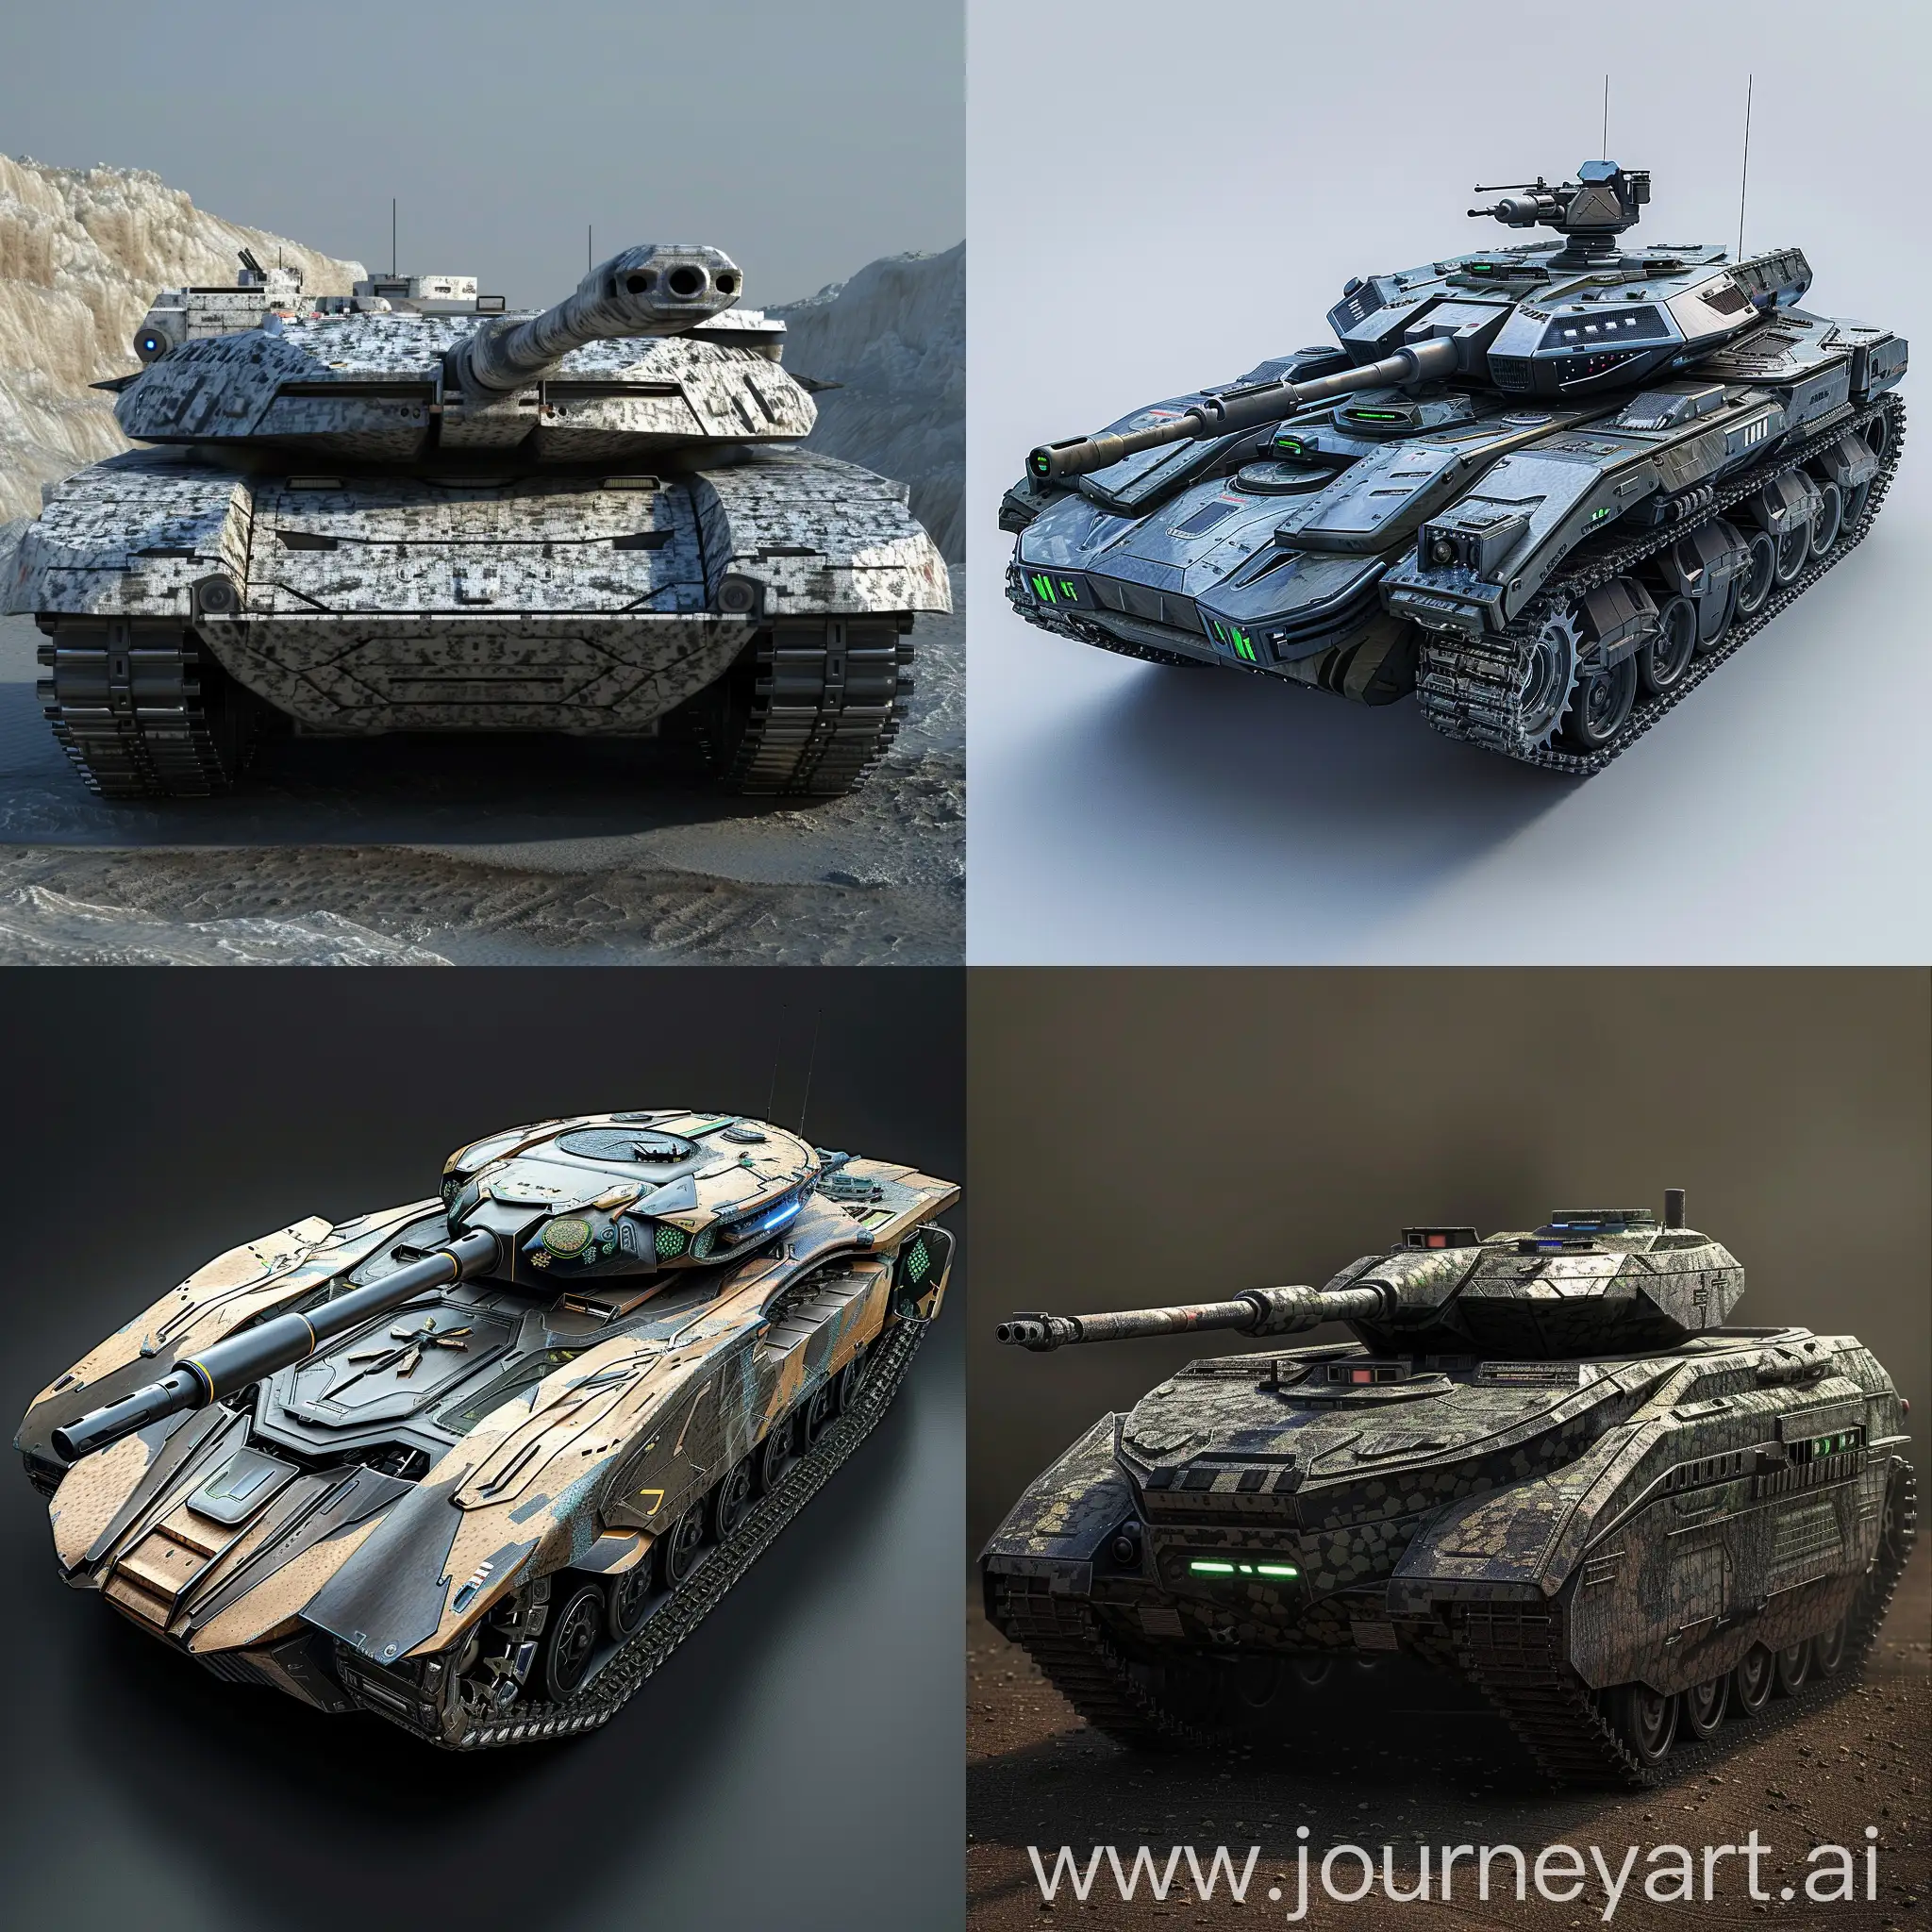 Futuristic-Tank-with-Integrated-AI-Systems-and-Advanced-Armor-Materials